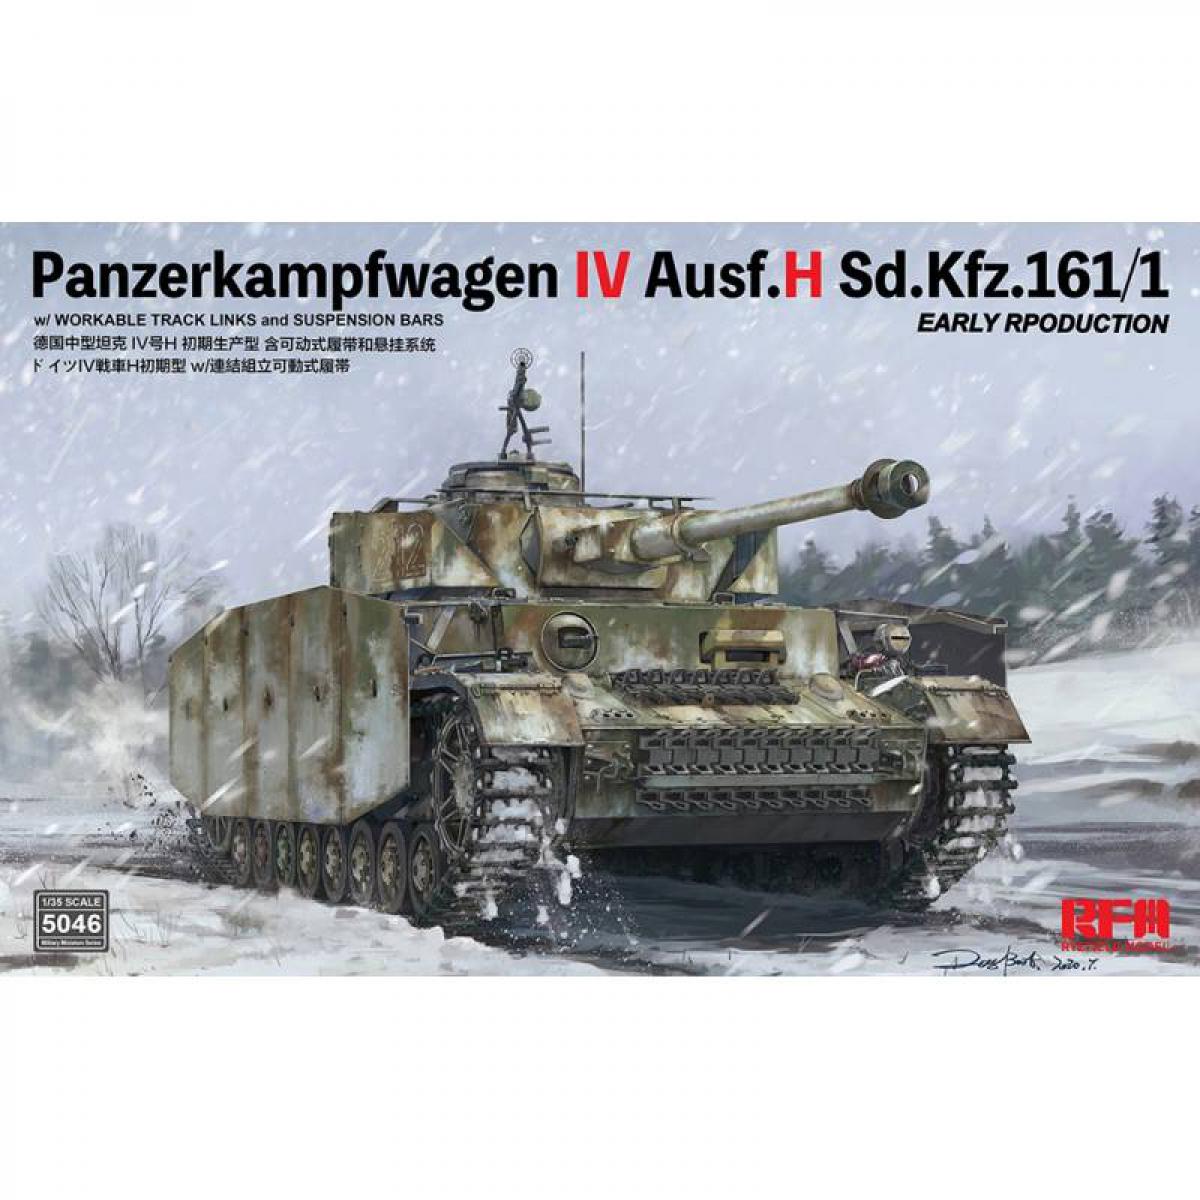 Rye Field Model - Maquette Char Panzerkampfwagen Iv Ausf.h Sd.kfz.161/1 Early Production - Chars